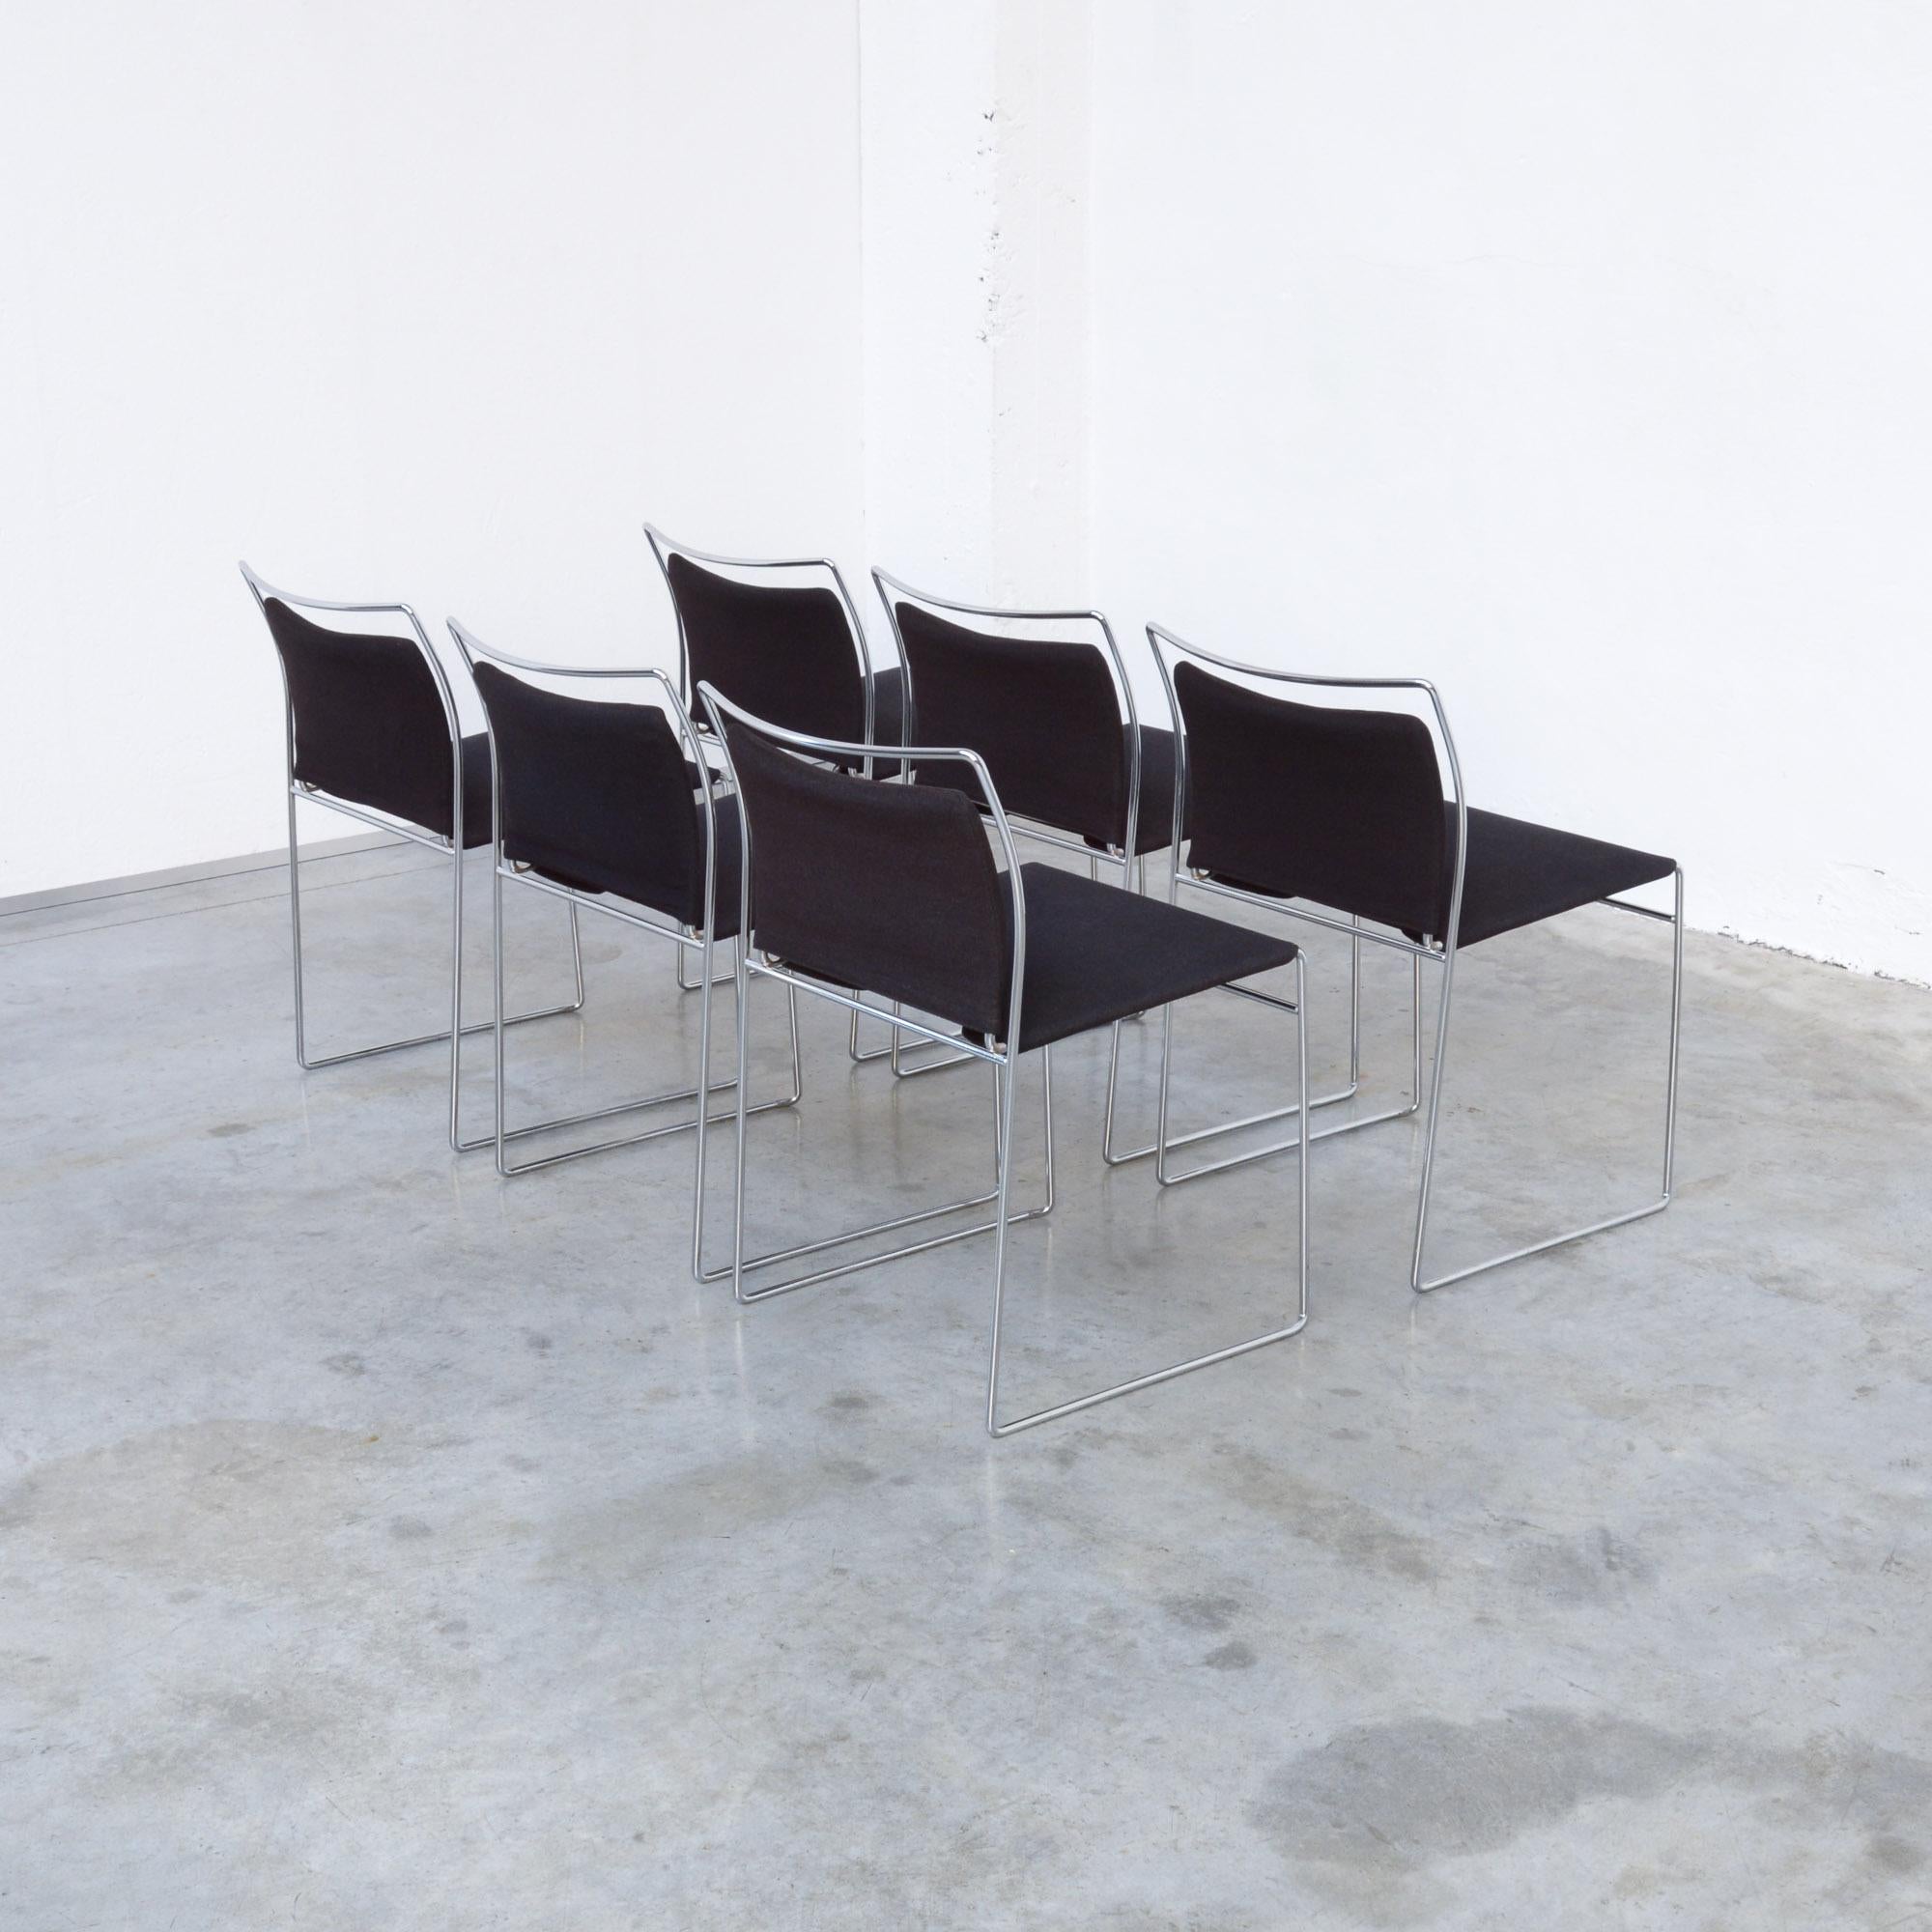 The Tulu chair was designed by the Japanese designer Kazuhide Takahama for Simon International in 1966-1967. The Tulu is one of the very first models that paved the way for the use of the rod, an evolution from tube bending.
The rod makes it